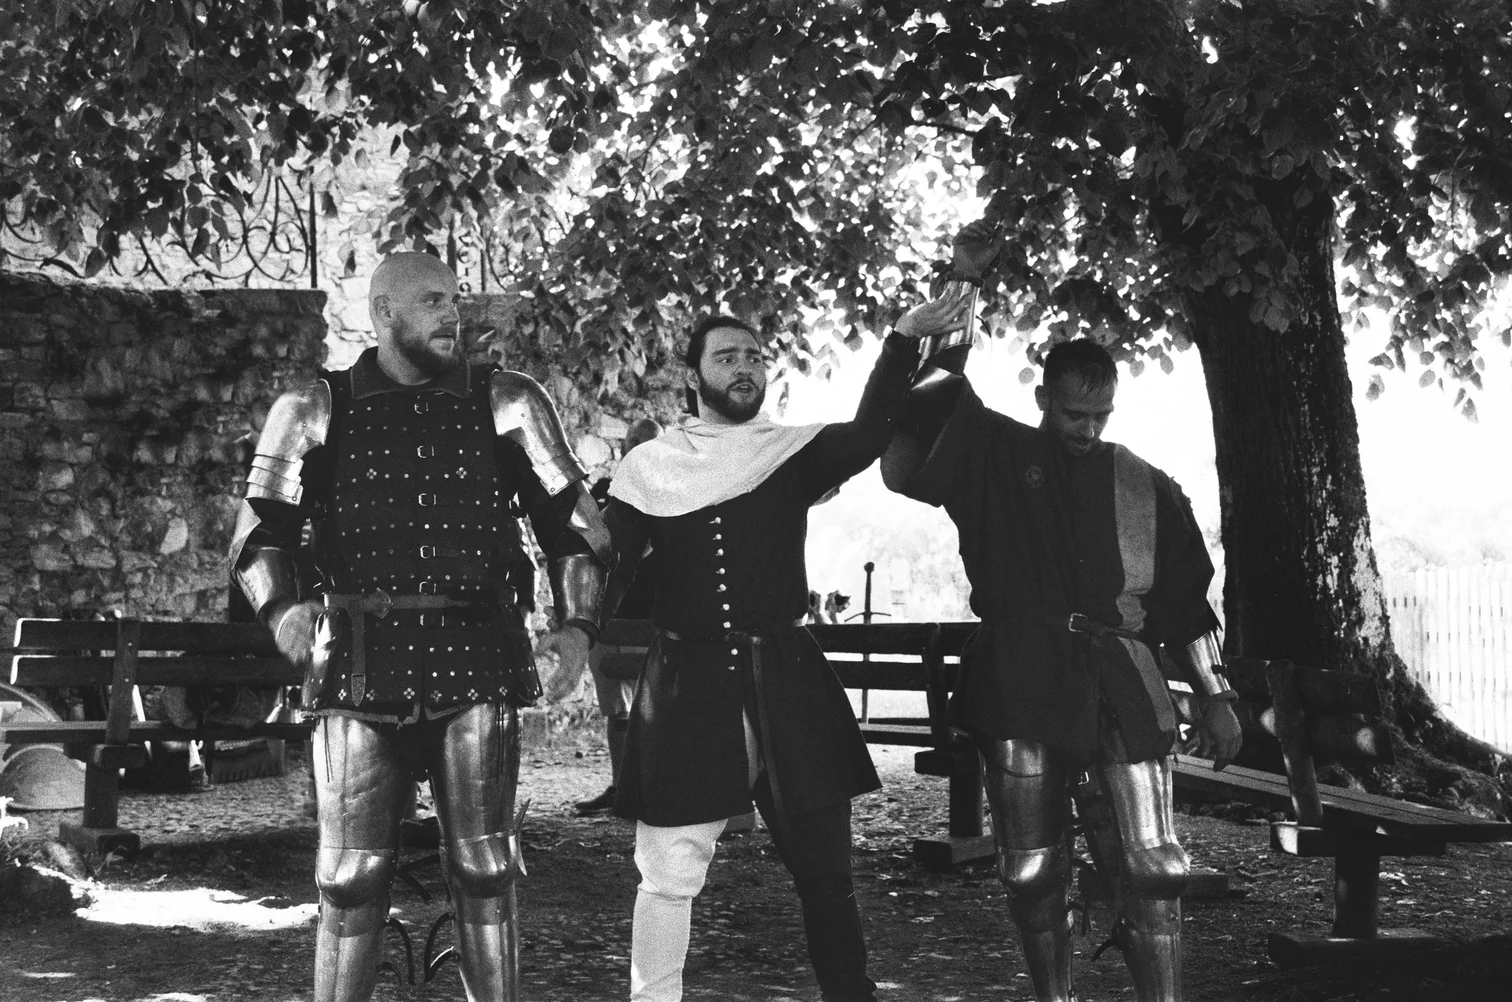 a group of men in armor